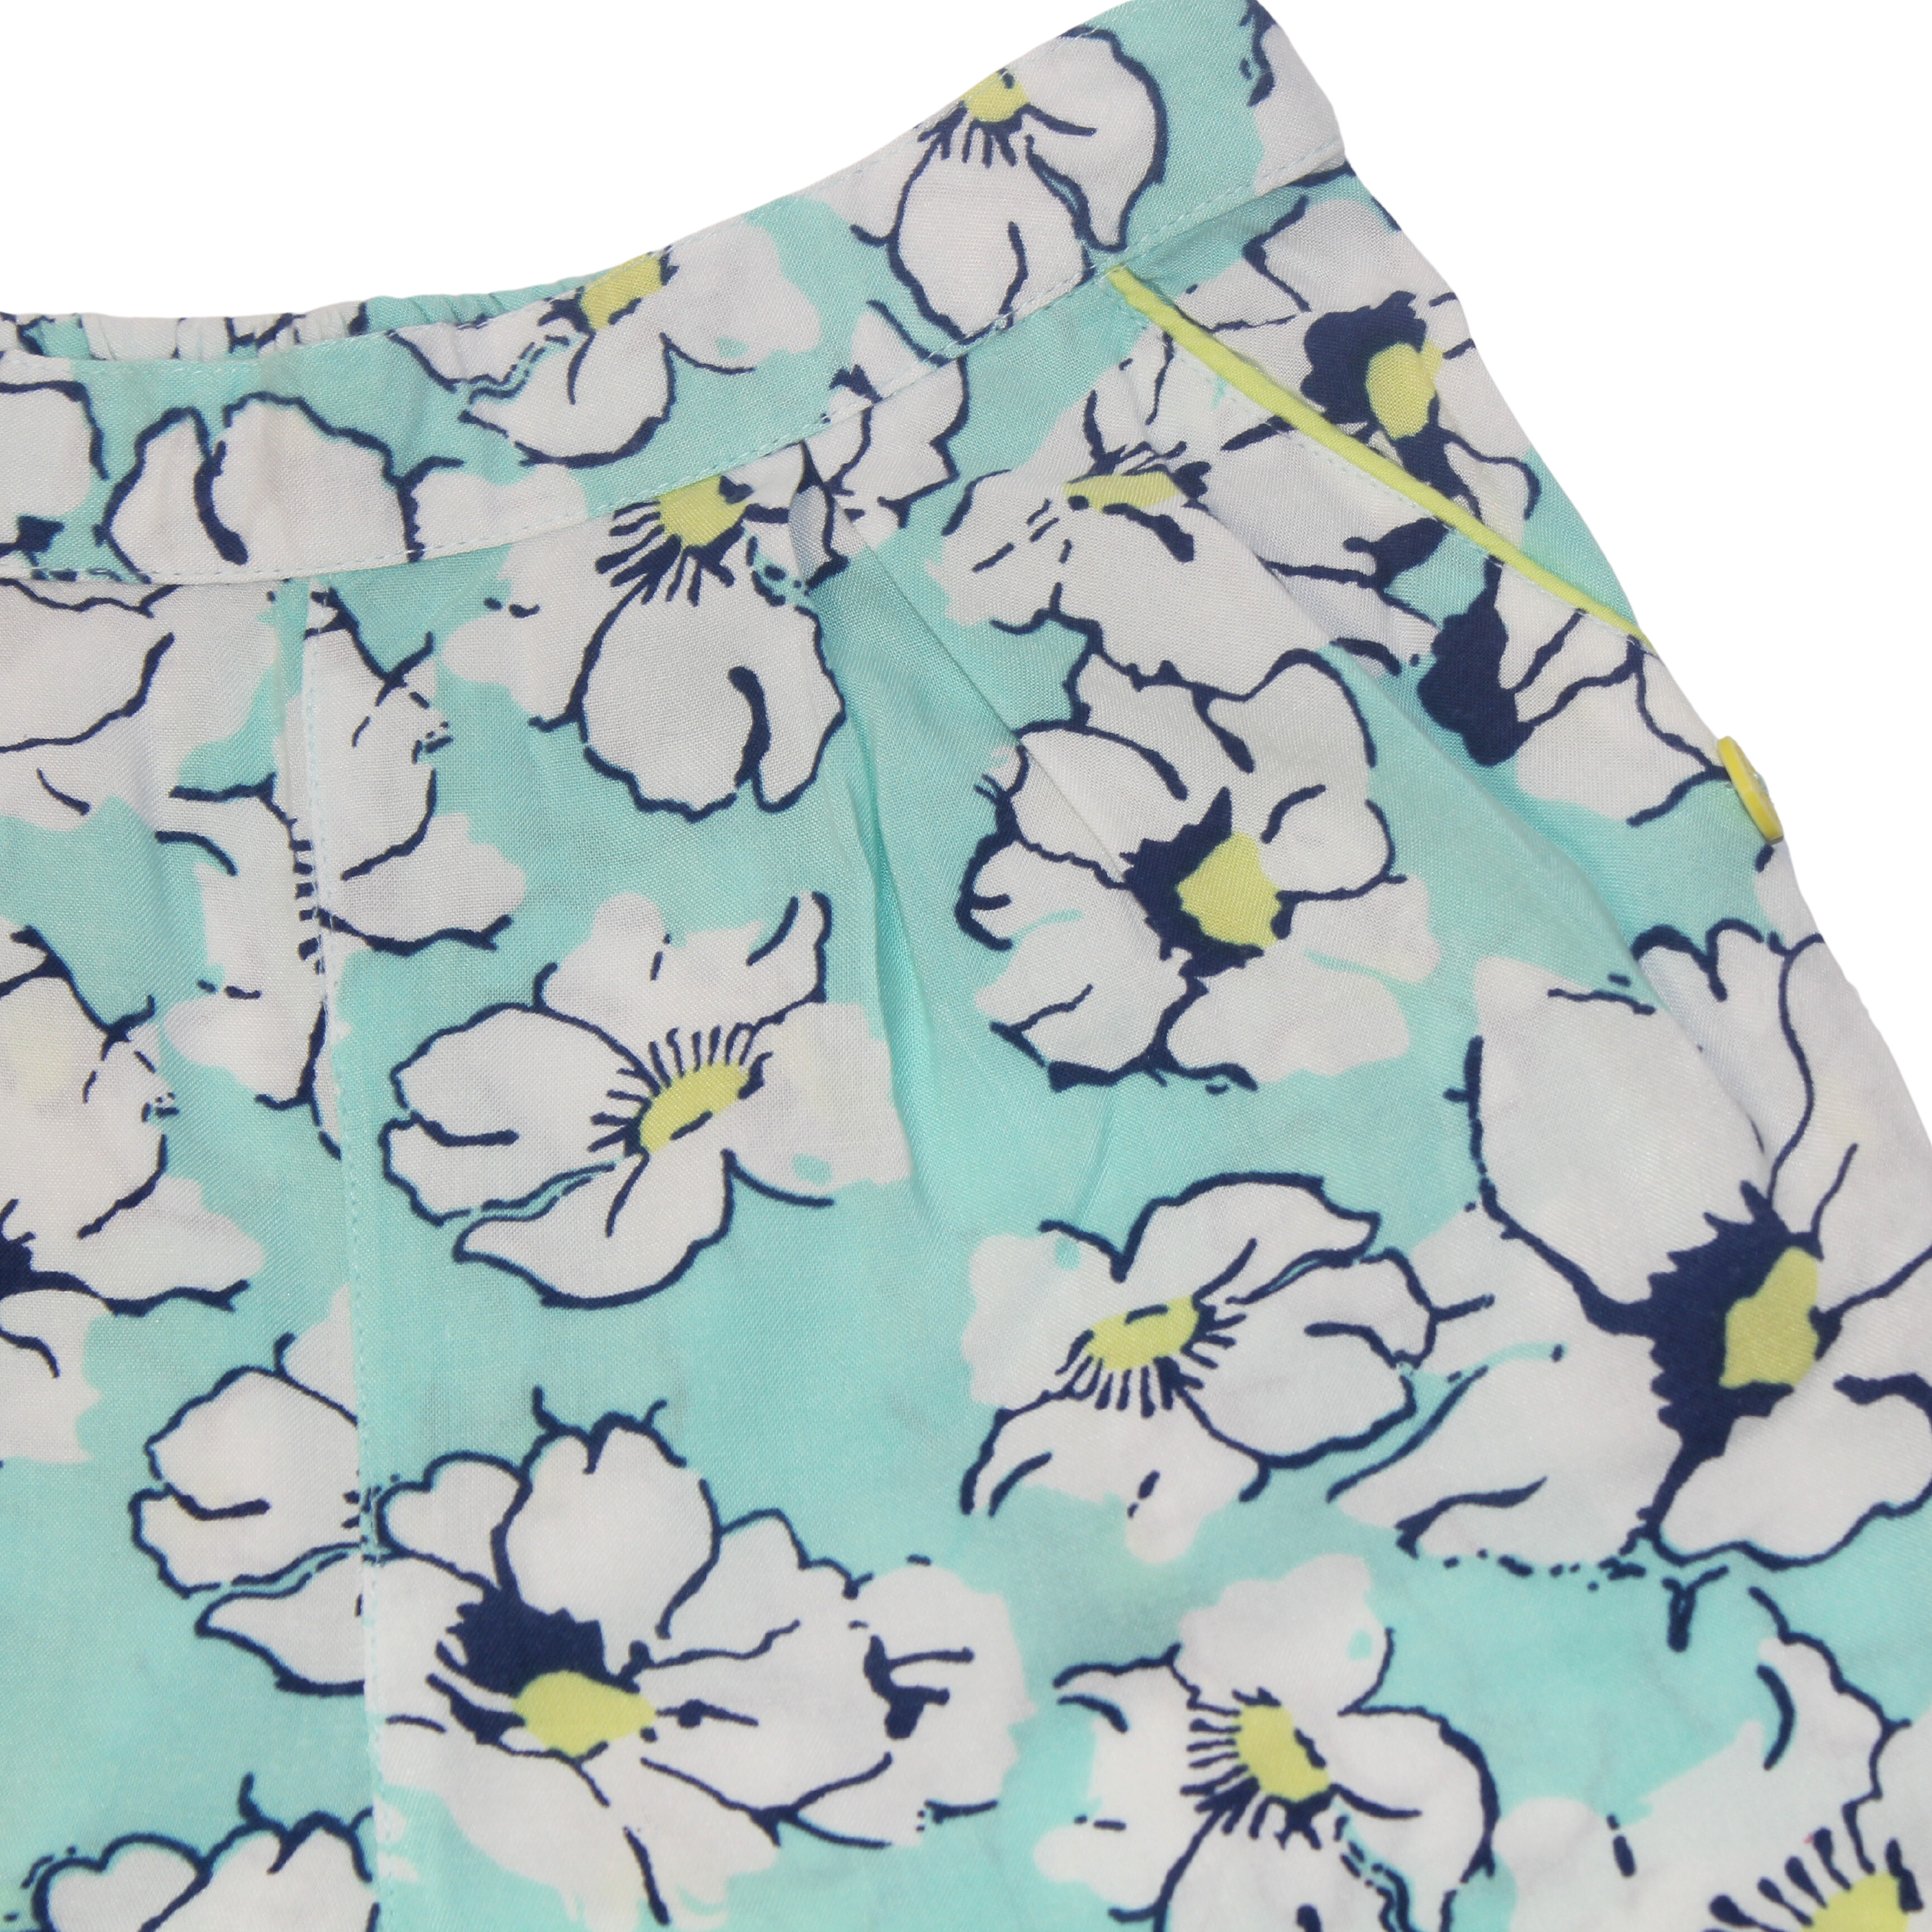 Floral Lightweight Trousers